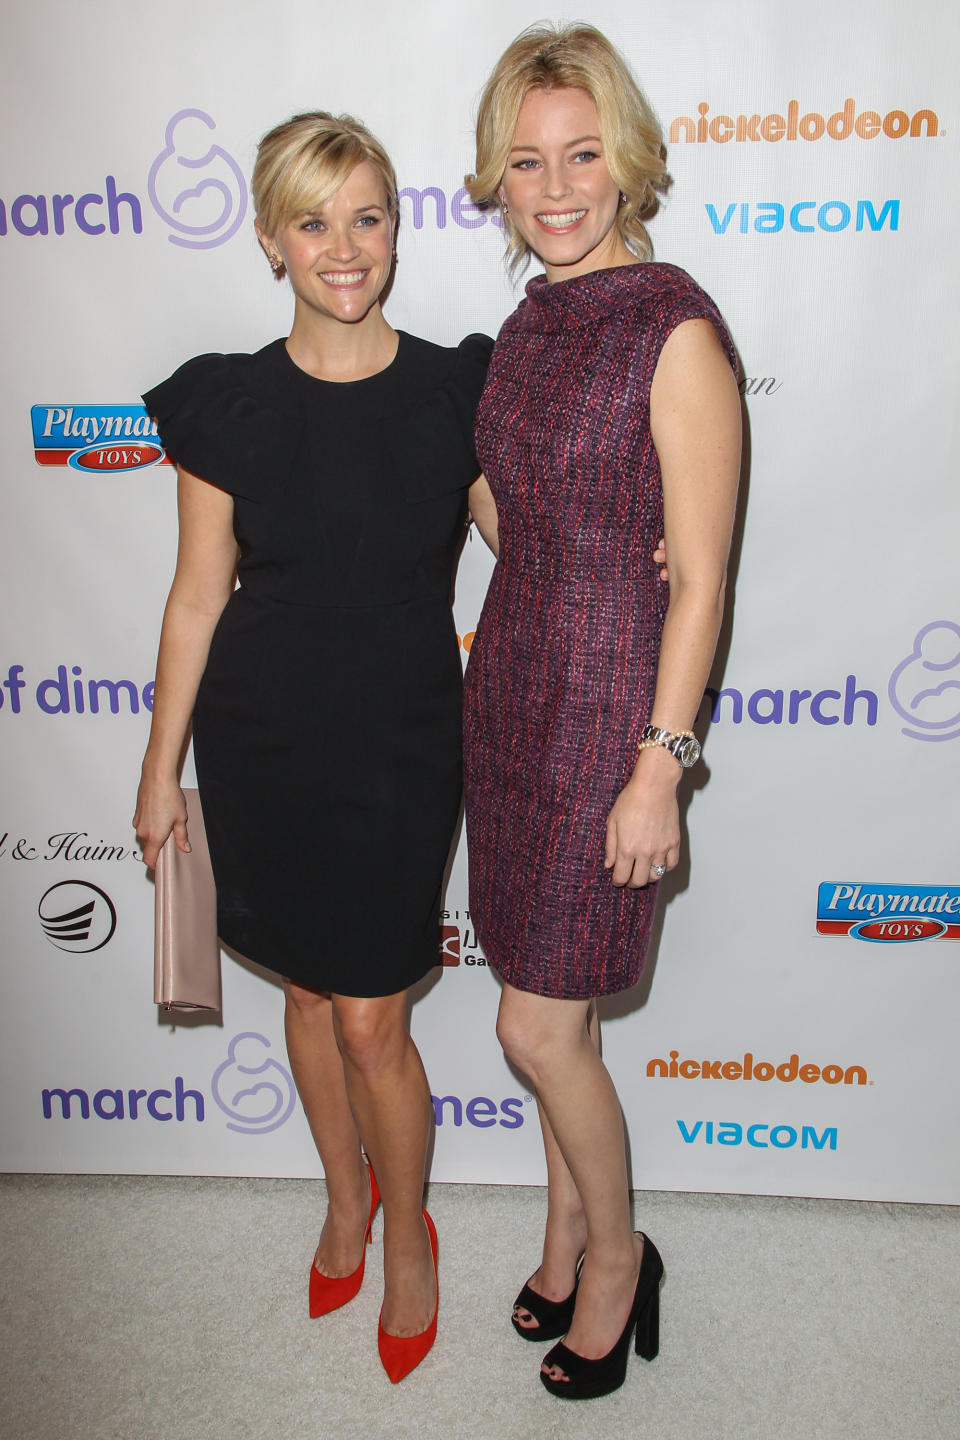 BEVERLY HILLS, CA - DECEMBER 07:  Elizabeth Banks and Reese Witherspoon arrives at the March Of Dimes' Celebration Of Babies held at the Beverly Hills Hotel on December 7, 2012 in Beverly Hills, California.  (Photo by Paul A. Hebert/Getty Images)